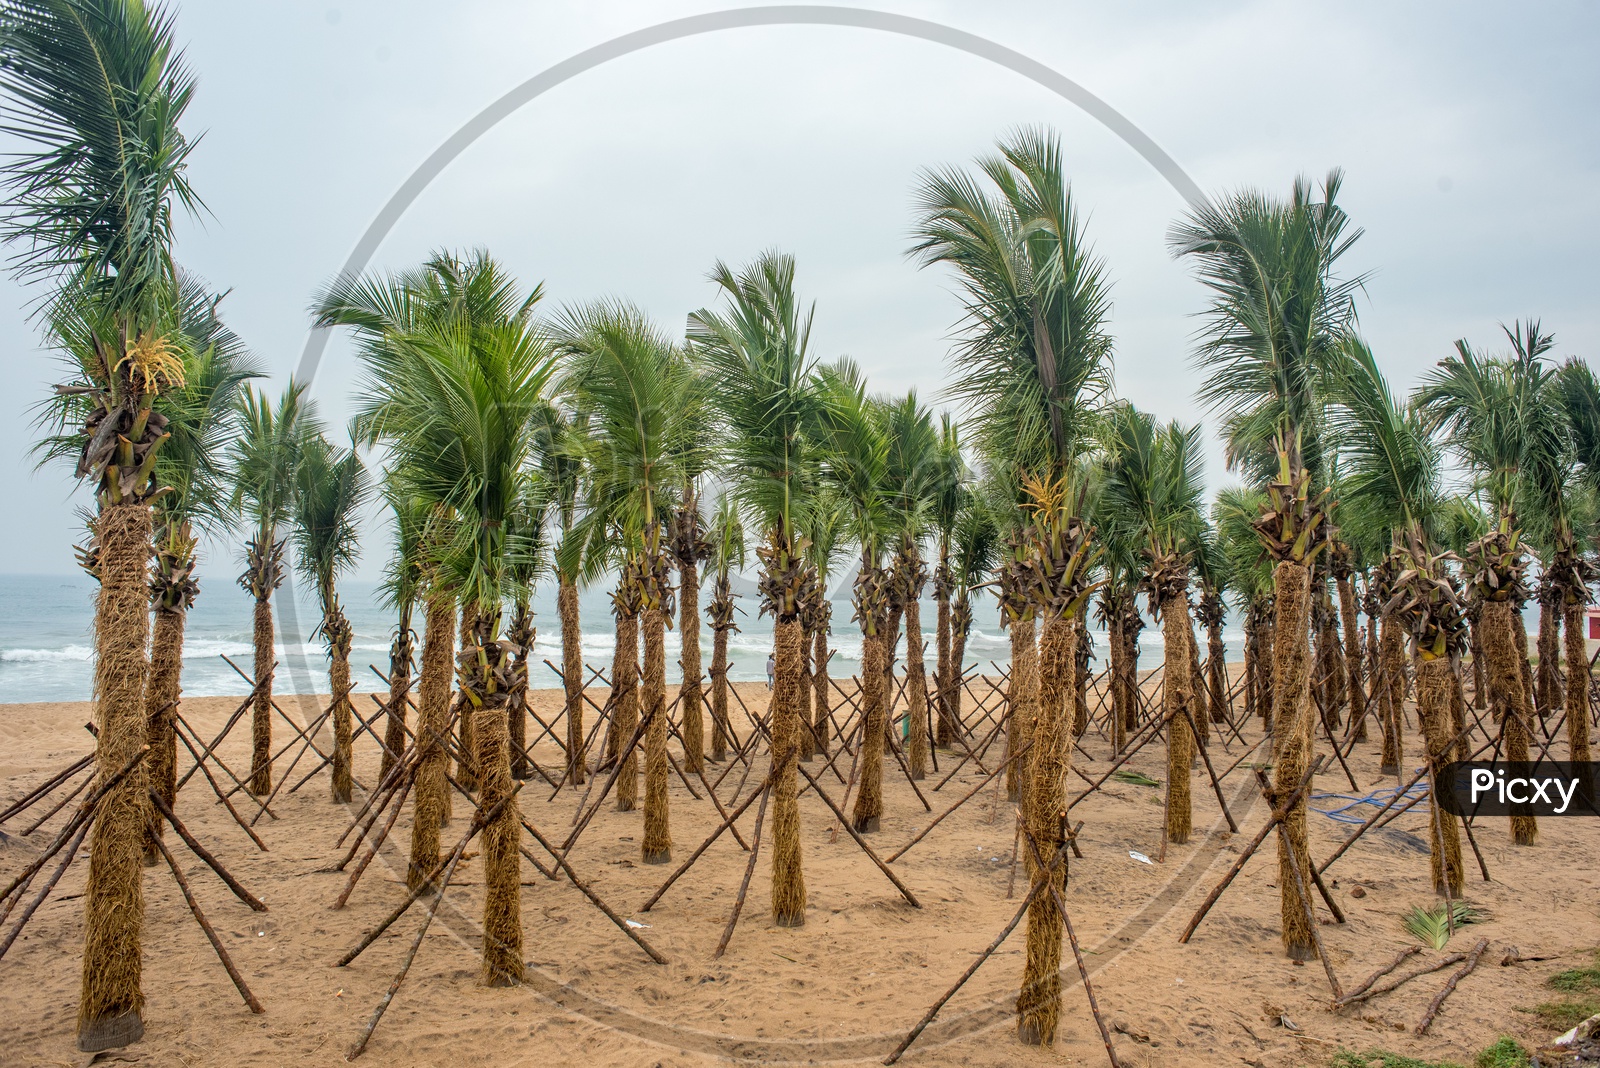 fully grown coconut trees being transplanted to Visakhapatnam beach road for tourism.